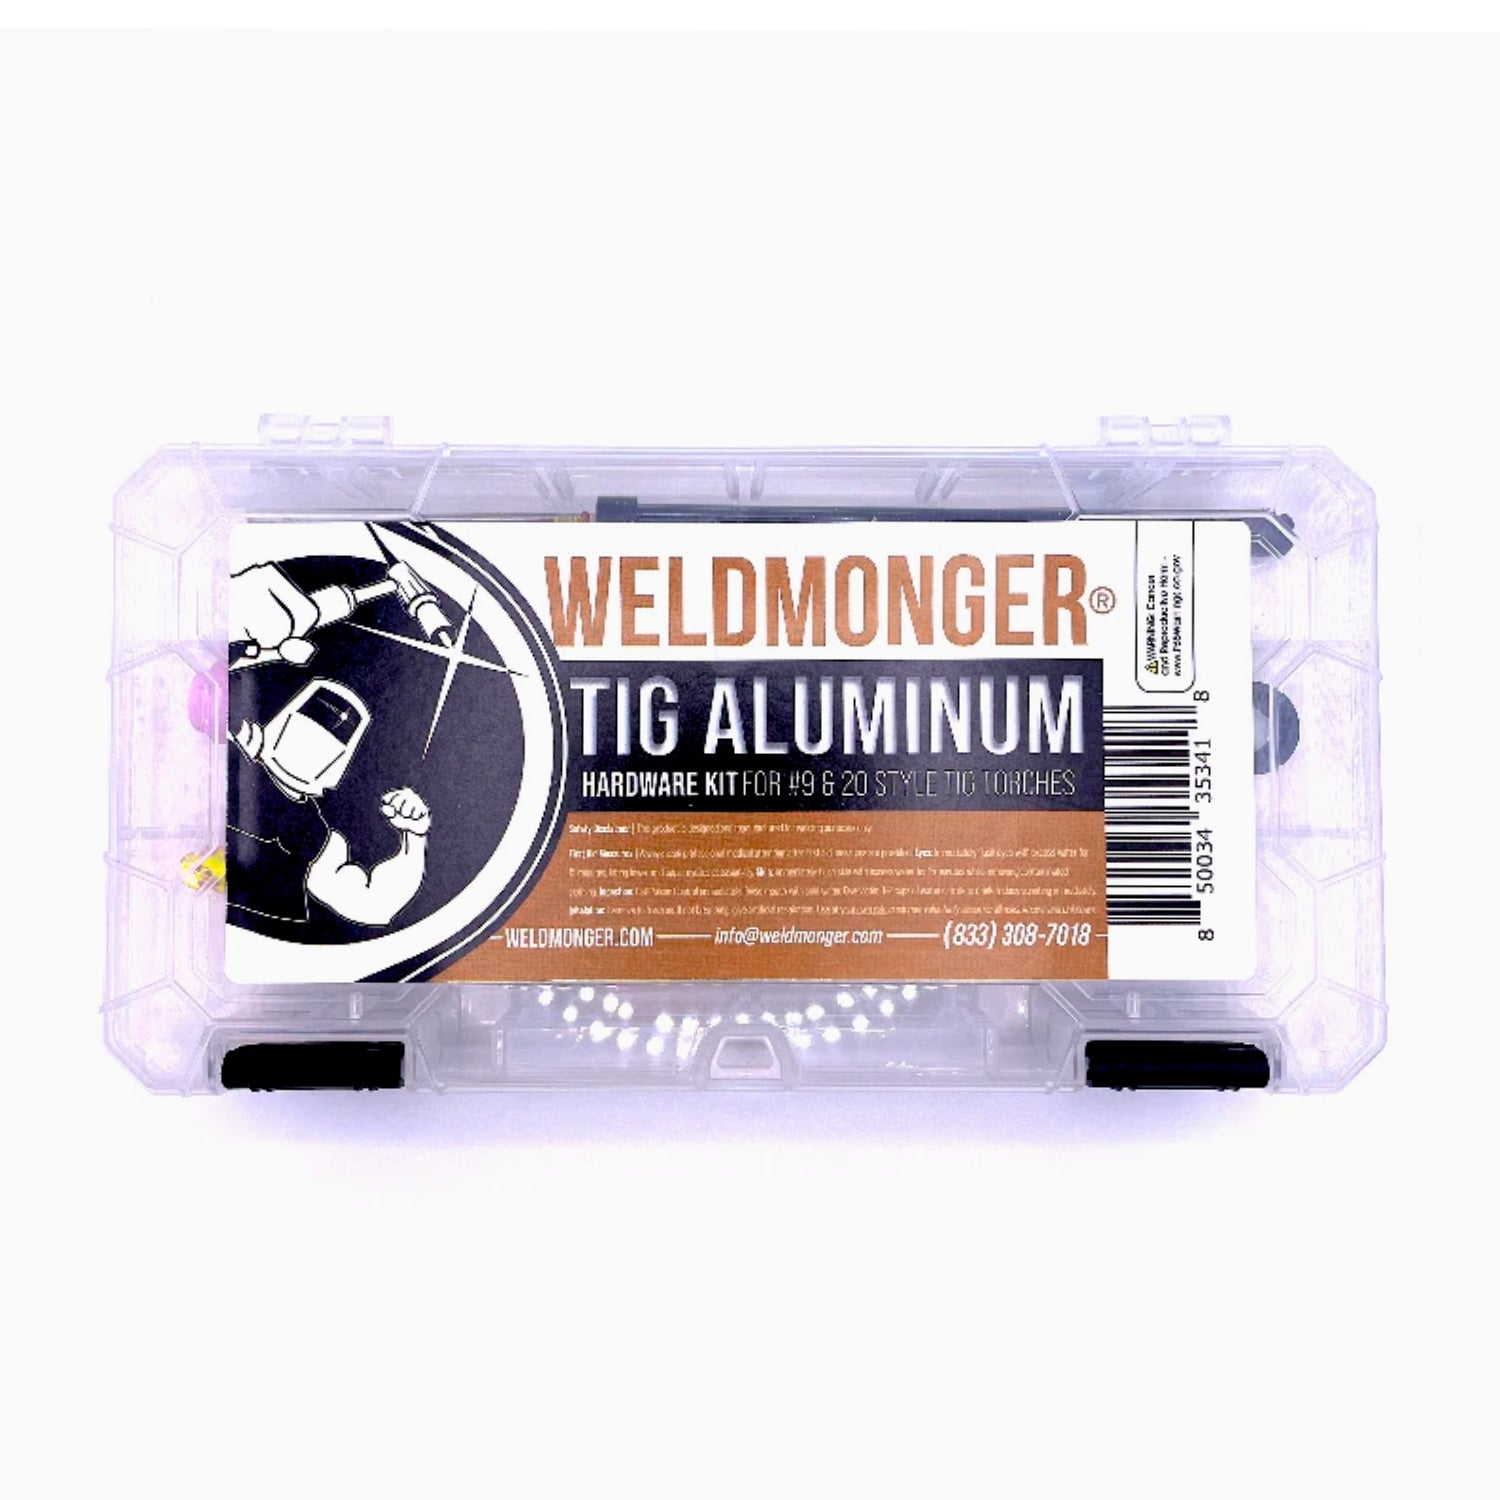 NEW! Weldmonger® TIG Aluminum Hardware Kit - for #9 and #20 Style Torches